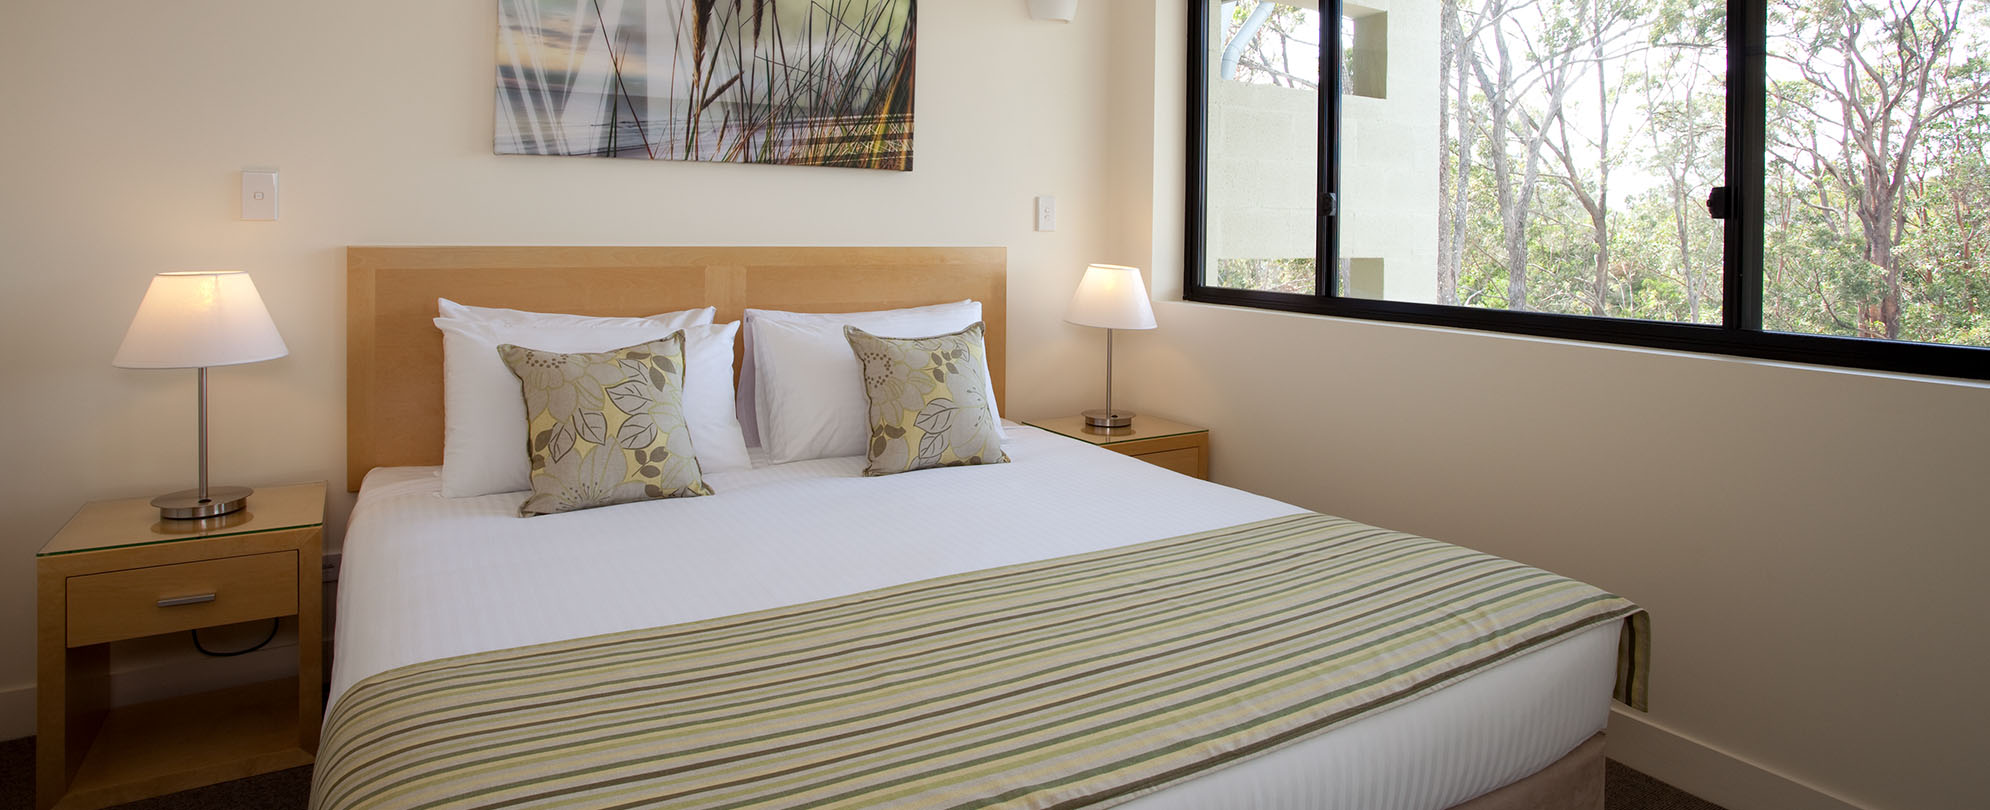 A queen-sized bed in a 2-bedroom suite at Club Wyndham Coffs Harbor.